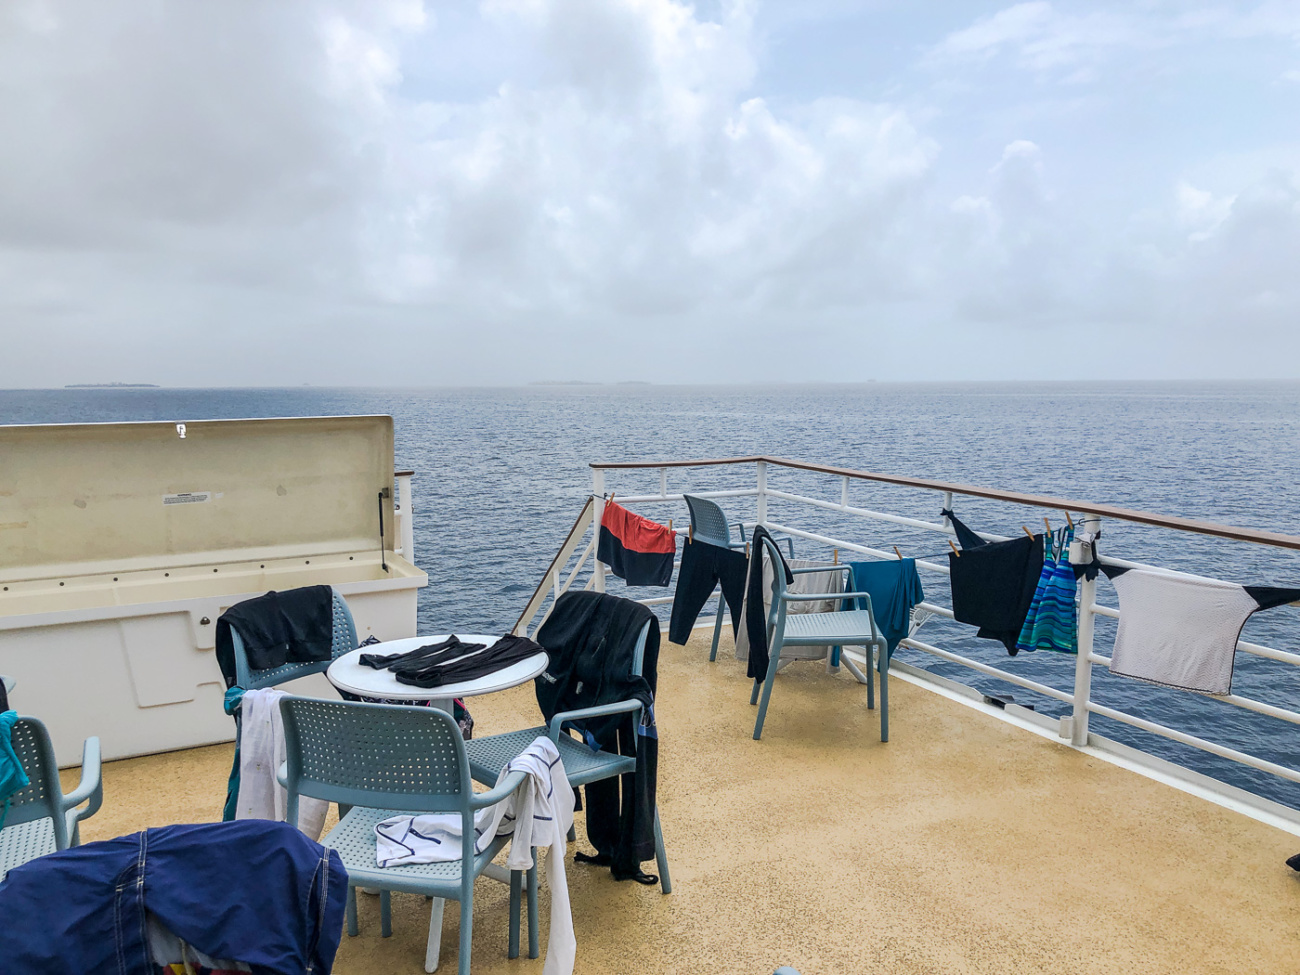 UnCruise laundry drying during an adventure cruise; cruise packing list